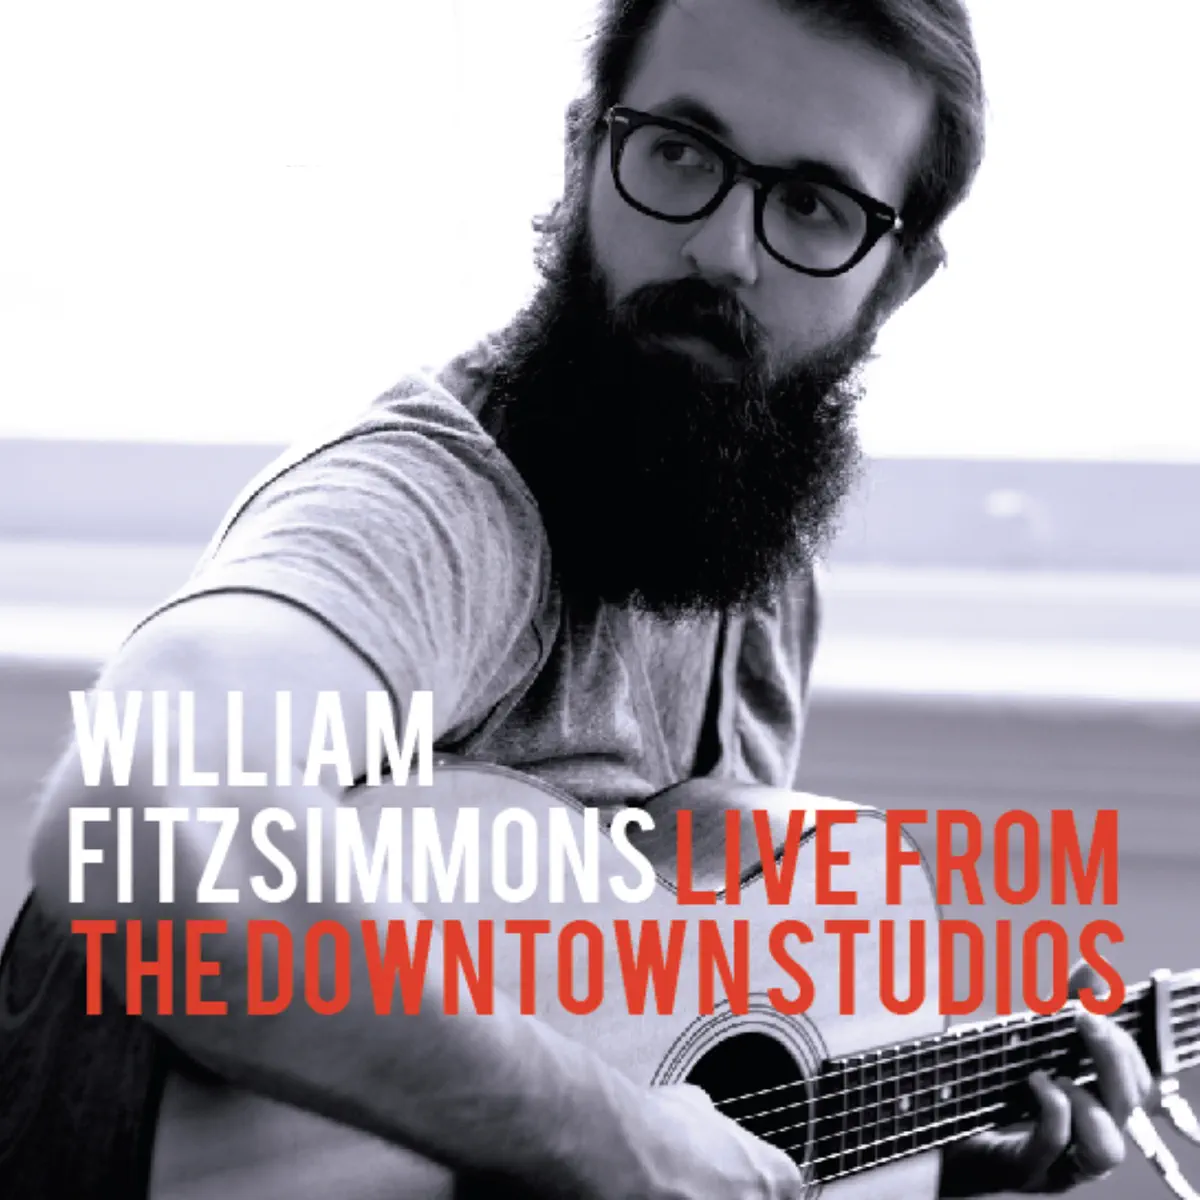 William Fitzsimmons - Live from the Downtown Studios (2009) [iTunes Plus AAC M4A]-新房子